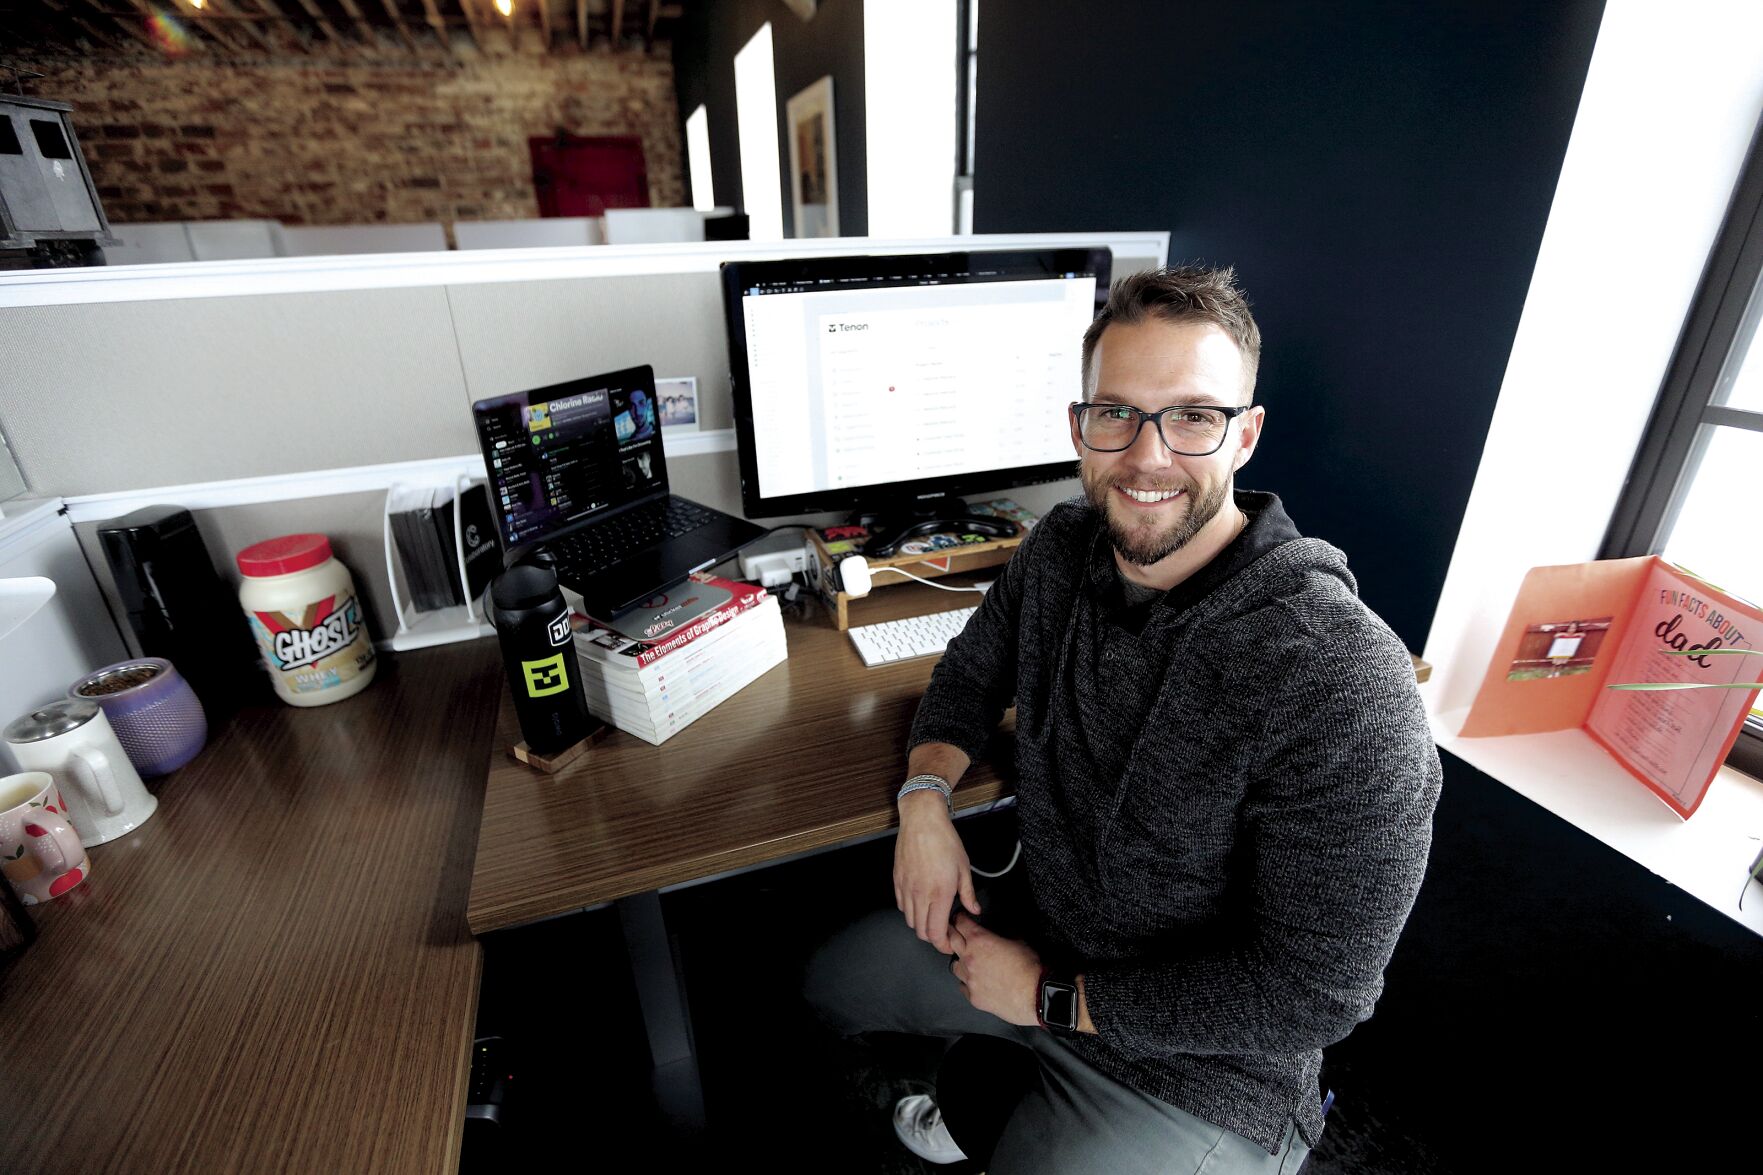 Eric Peters, of Dubuque, is a senior product designer for Tenon, a marketing solutions firm. He works remotely from the Innovation Lab’s co-working space.    PHOTO CREDIT: Dave Kettering